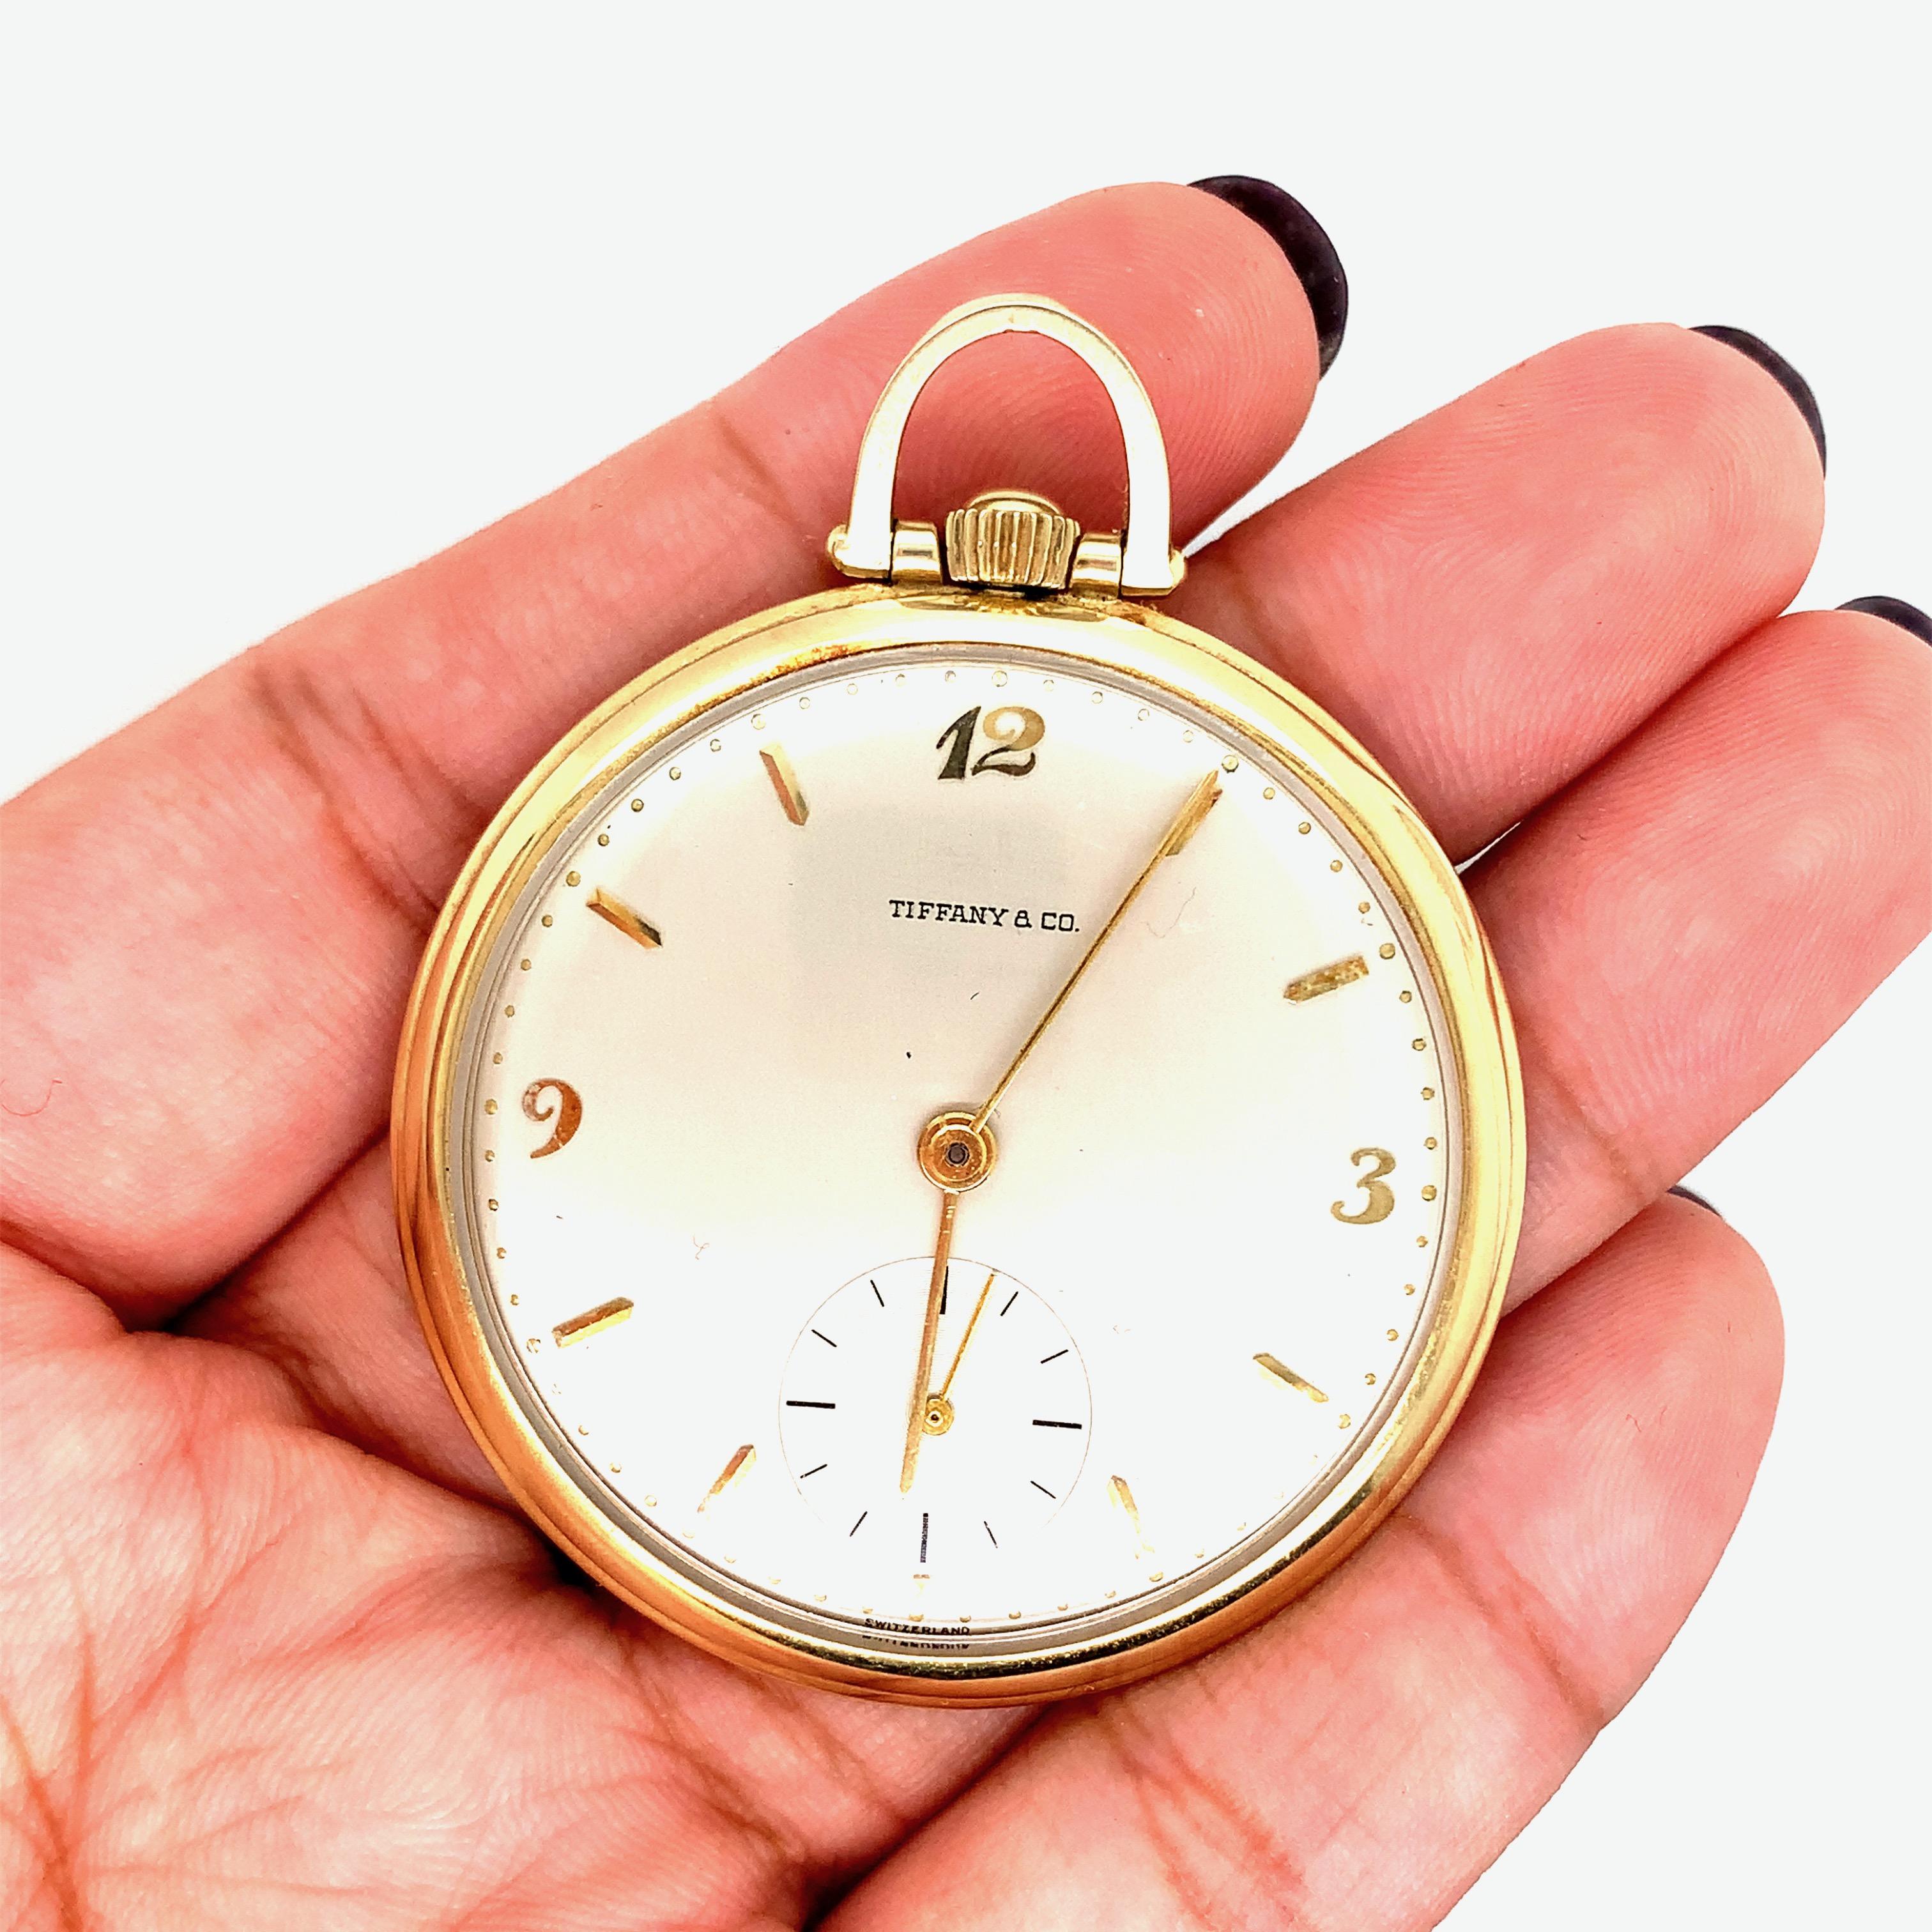 Tiffany & Co Movado Gold Pocket Watch In Excellent Condition For Sale In New York, NY